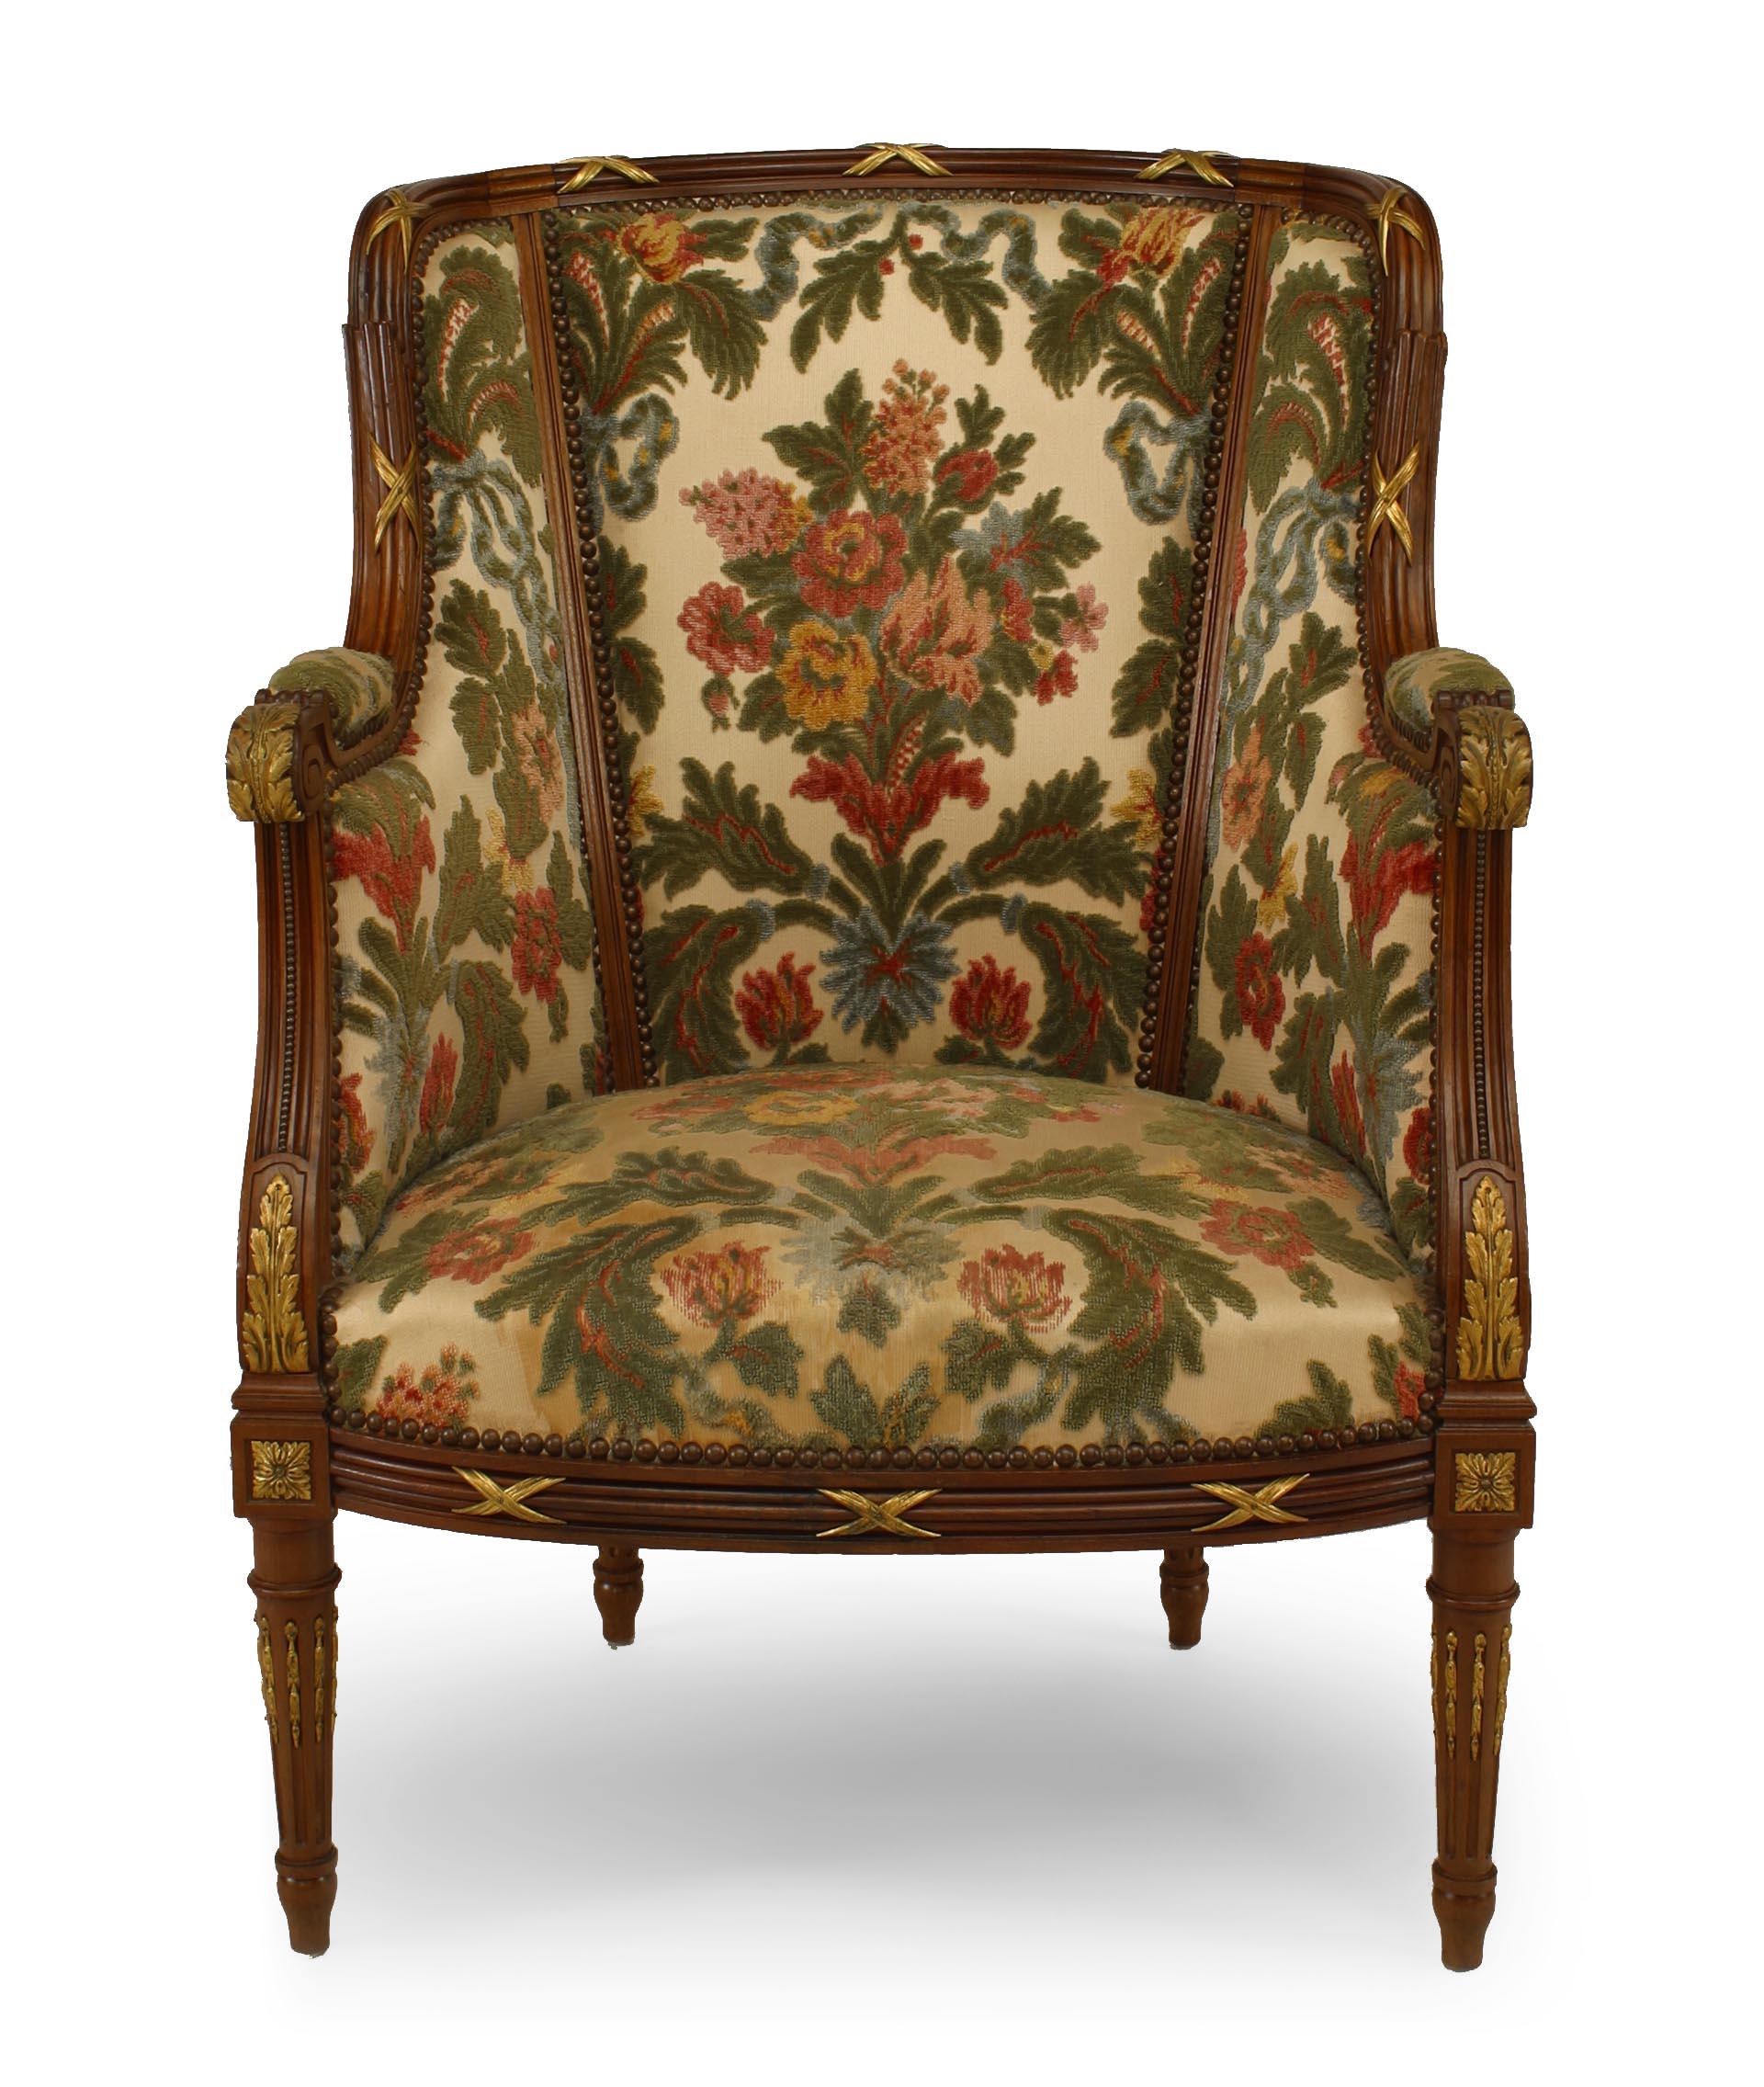 Pair of French Louis XVI style (20th century) bergeres with floral cut velvet tapestry upholstery with matching ottoman (3 piece set).